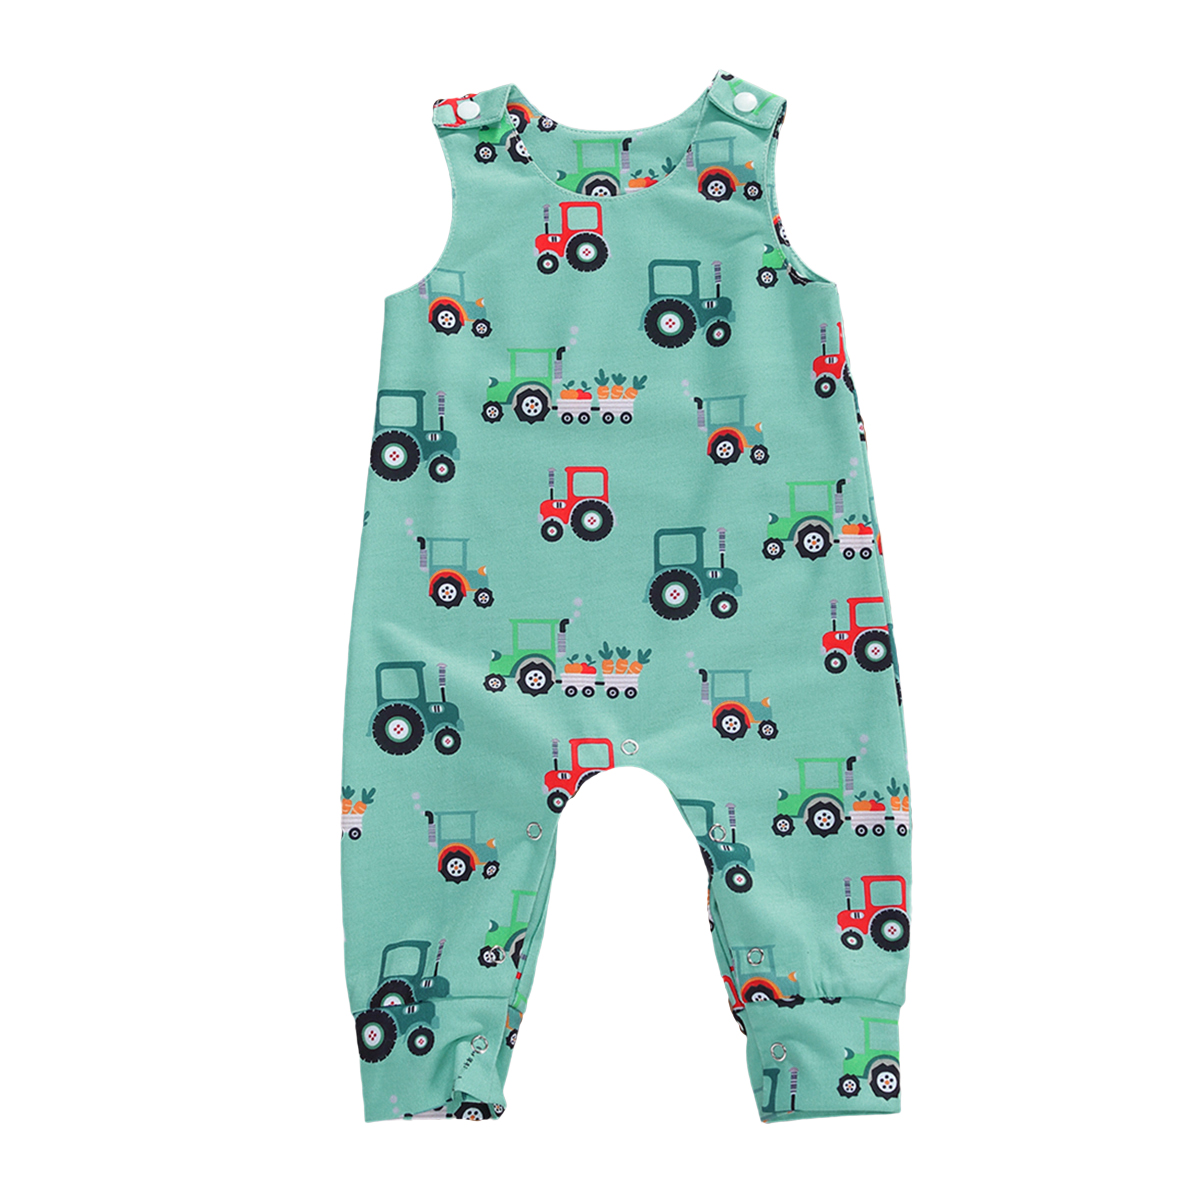 Newborn Baby Boys Girls Romper Jumpsuit Pocket Clothes Outfits Cotton Playsuit